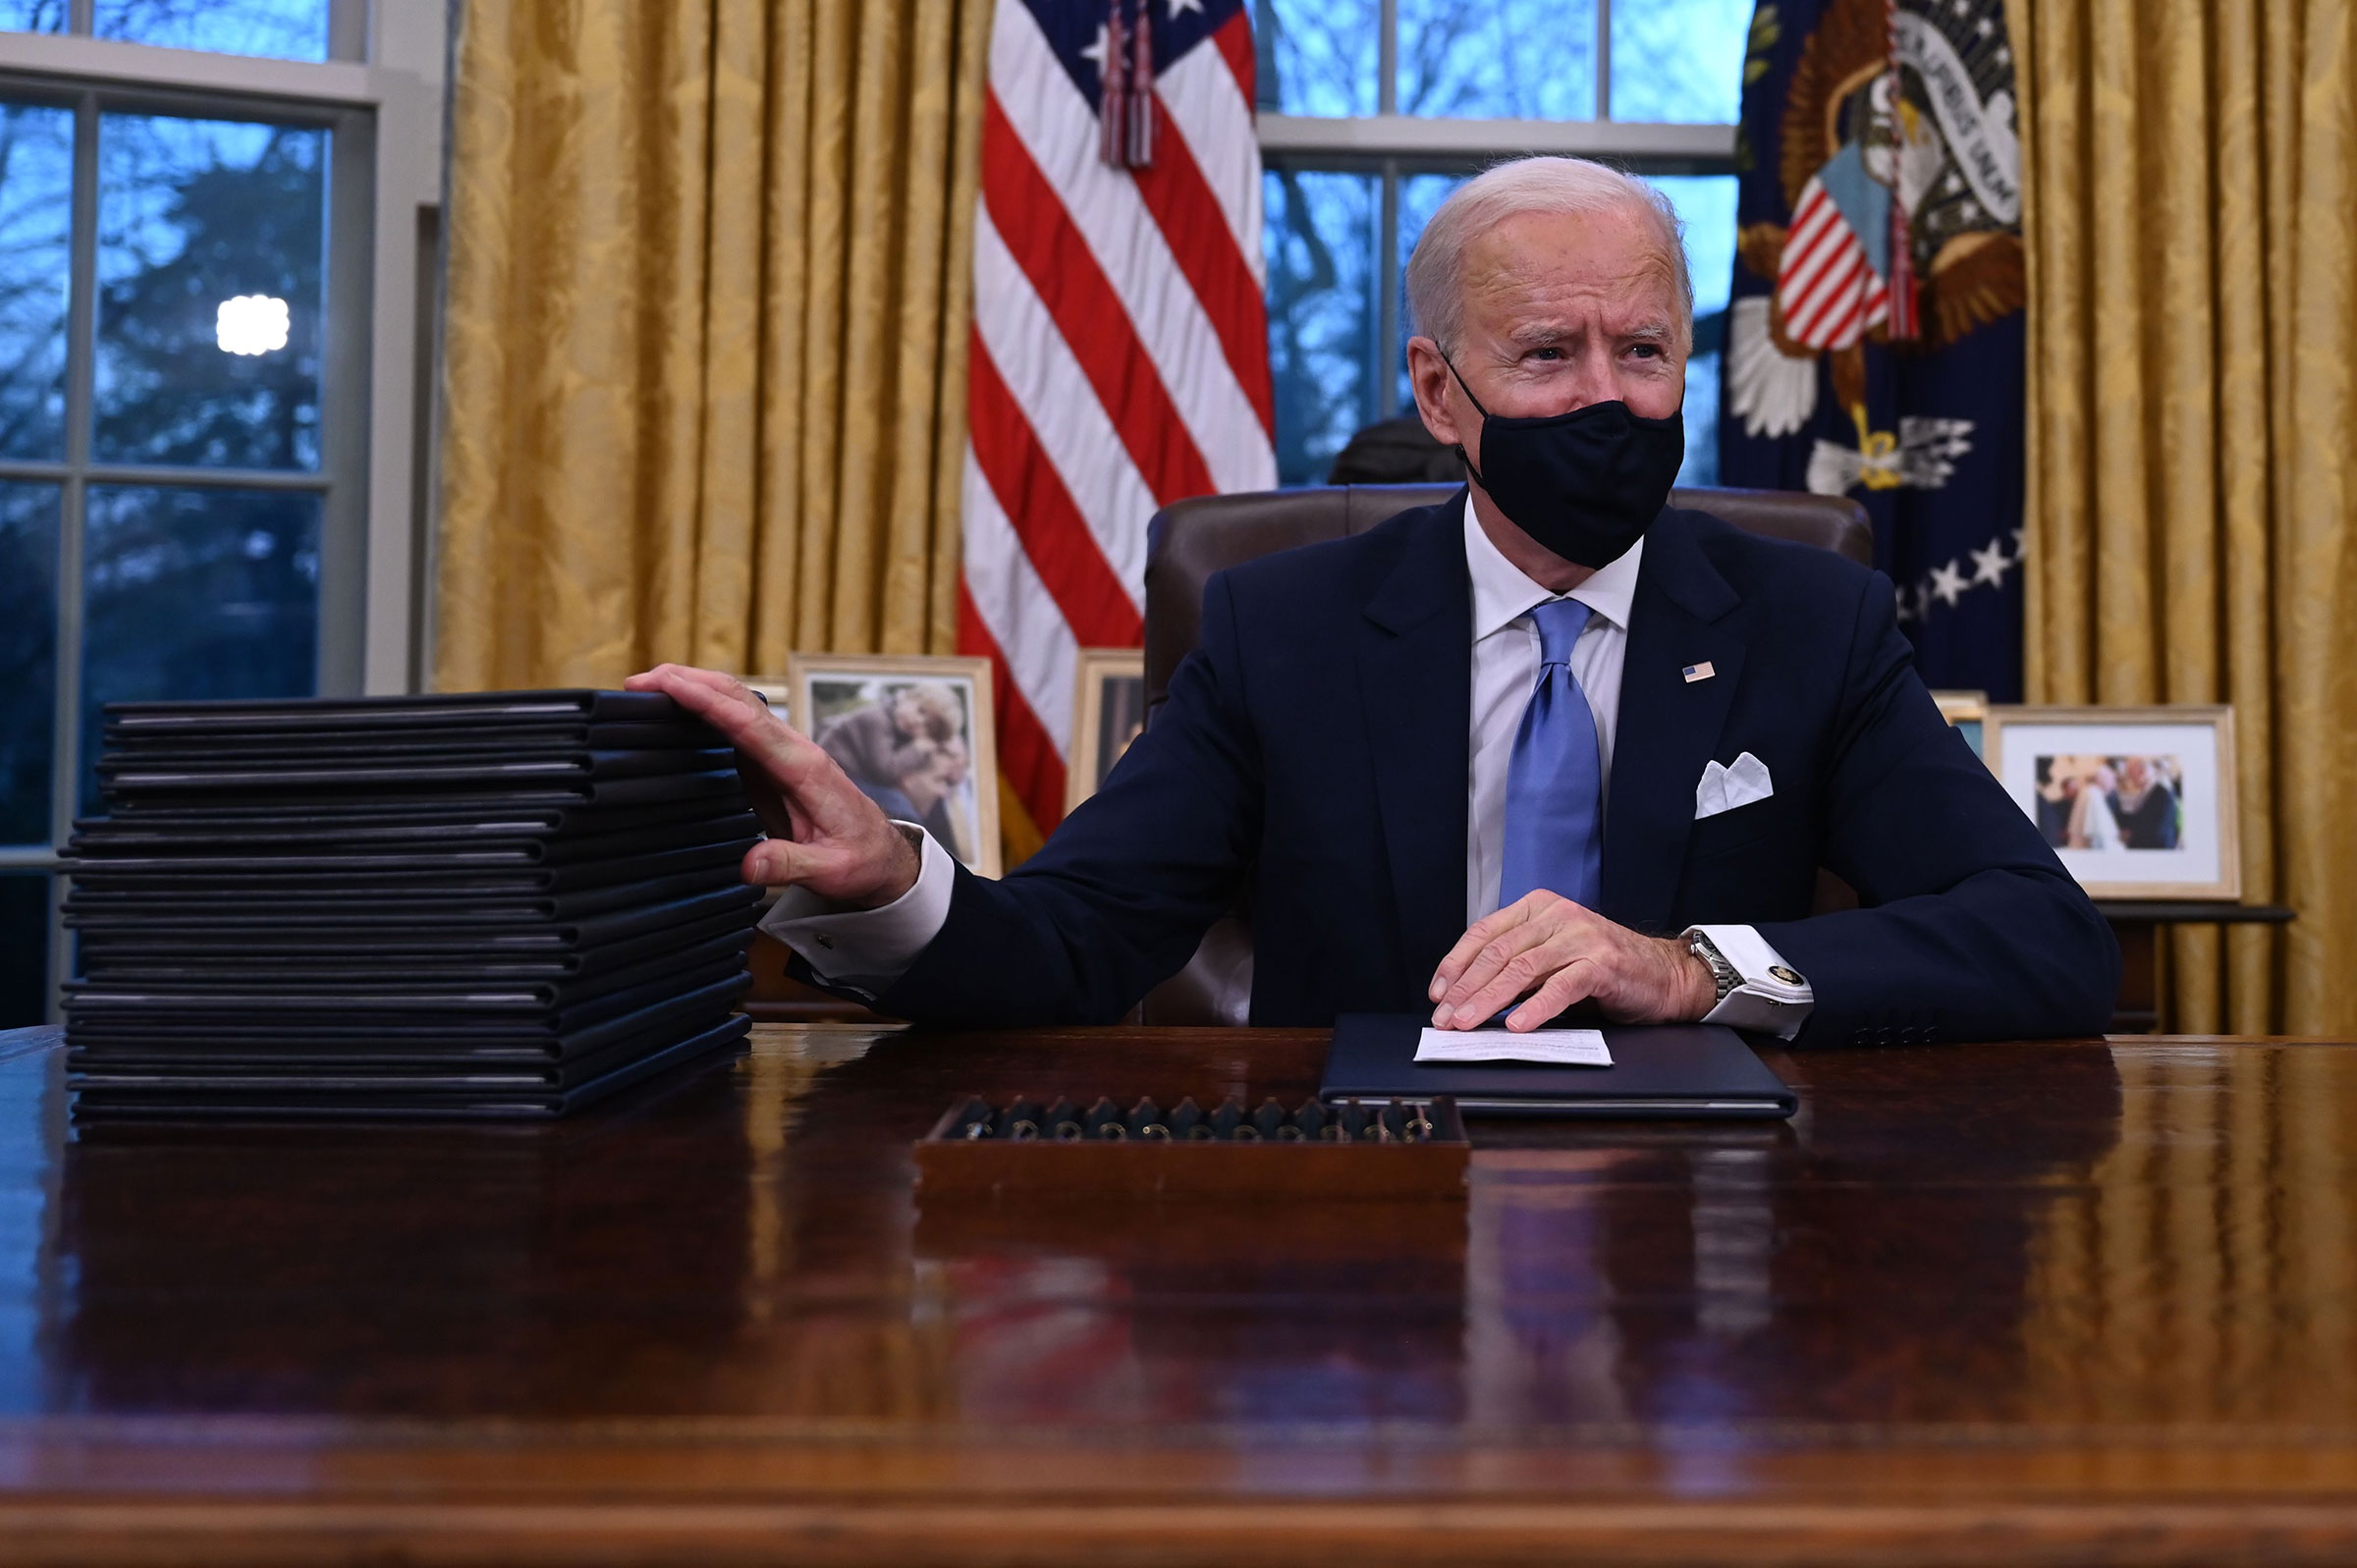 US President Joe Biden prepares to sign a series of orders, including an order to strengthen the fight against Covid-19, in the Oval Office of the White House in Washington, DC, on January 20, 2021. (Jim Watson—AFP/Getty Images)